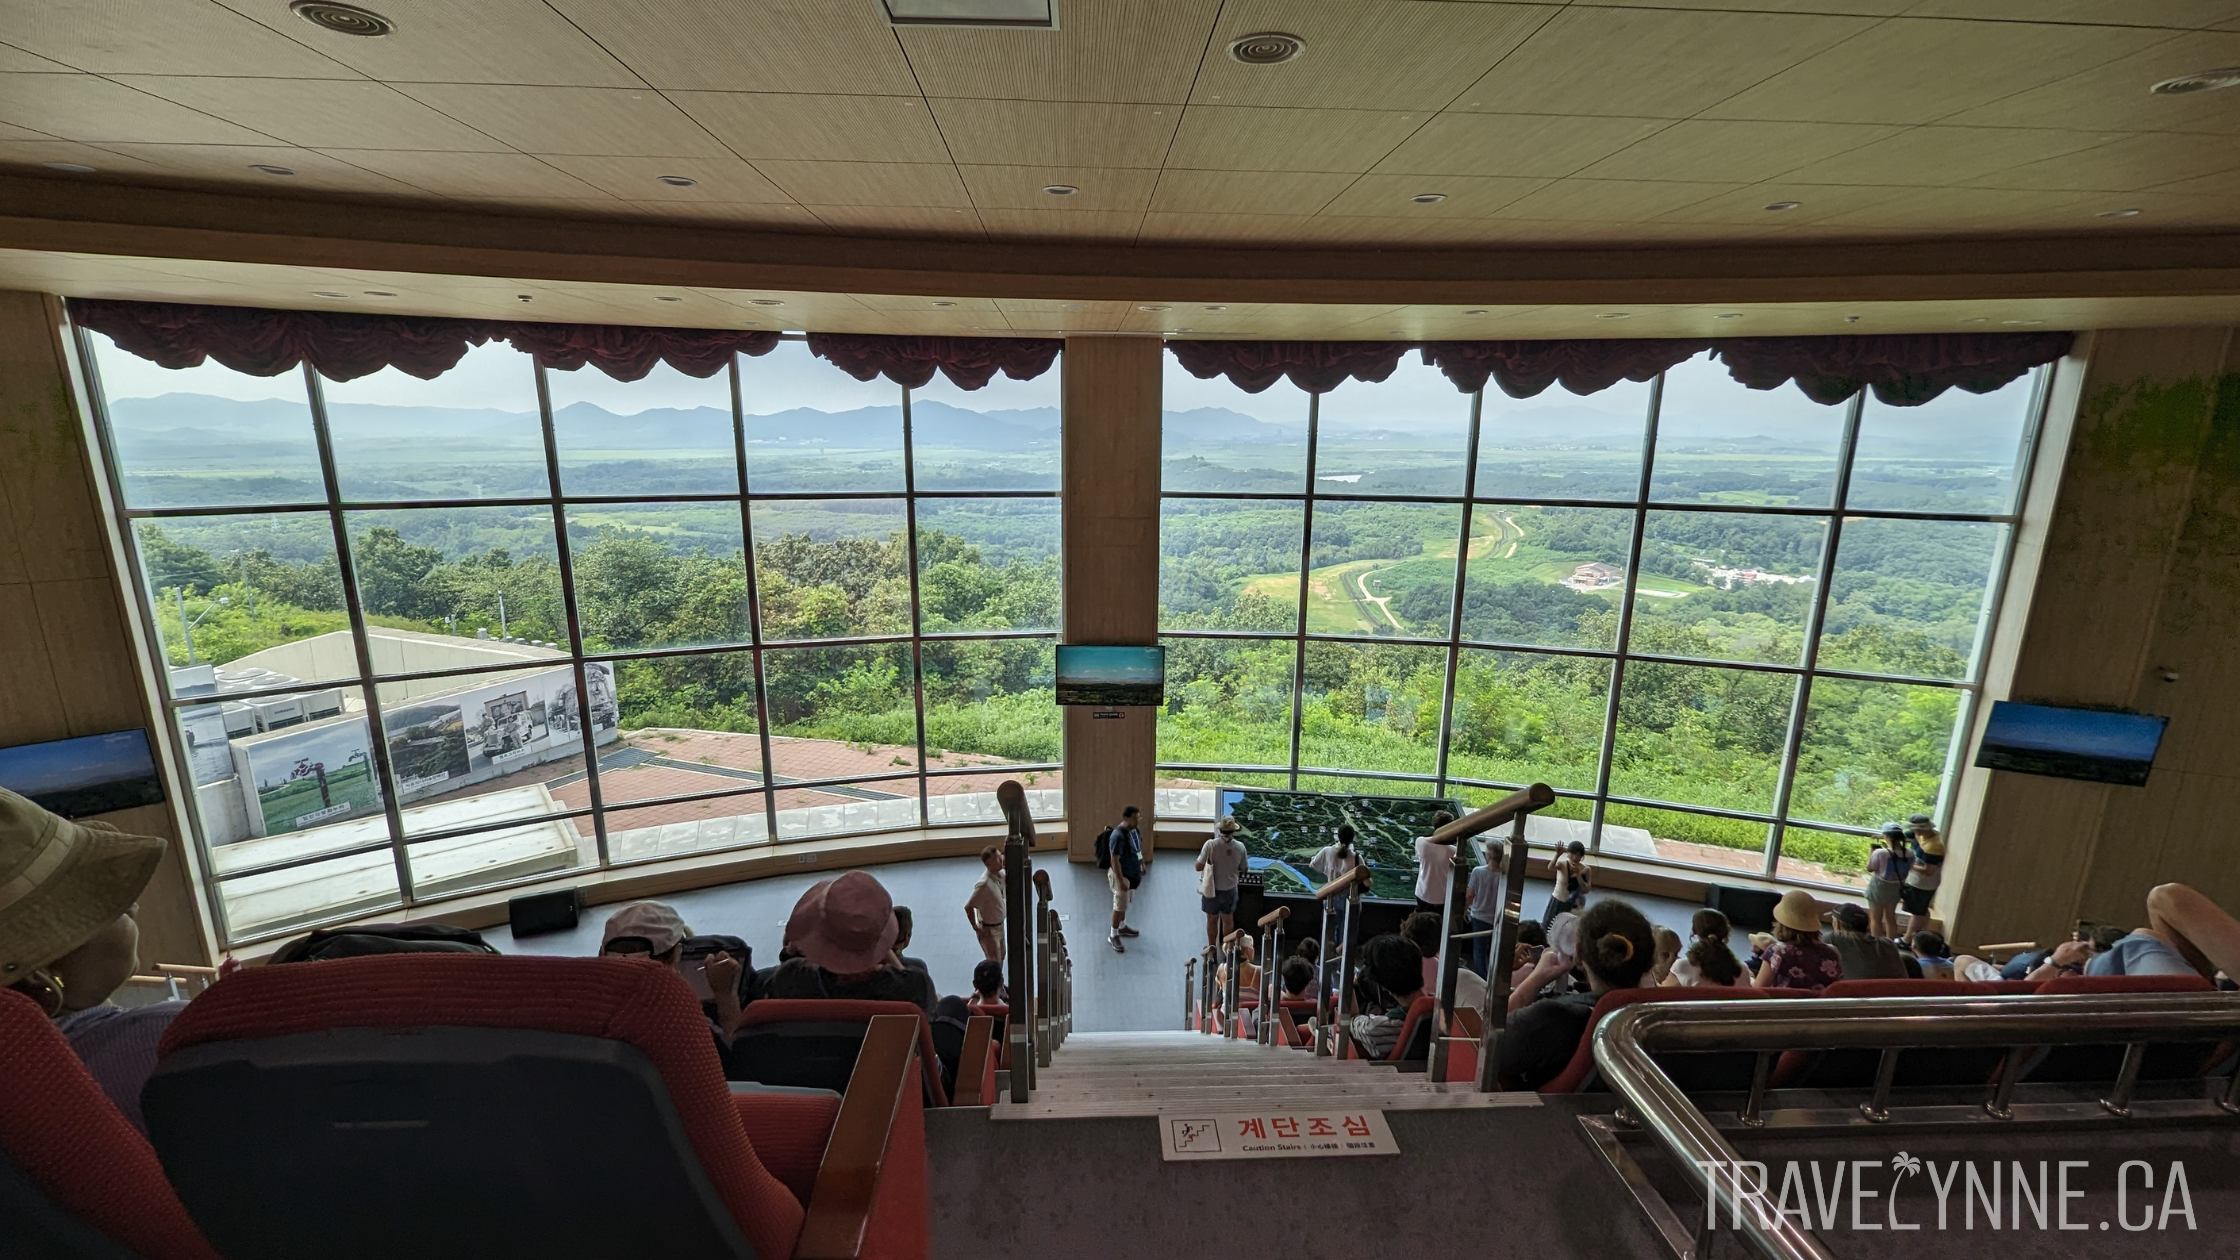 Inside Dora Observatory, a giant window in a theatre room overlooks lush landscapes in North Korea.